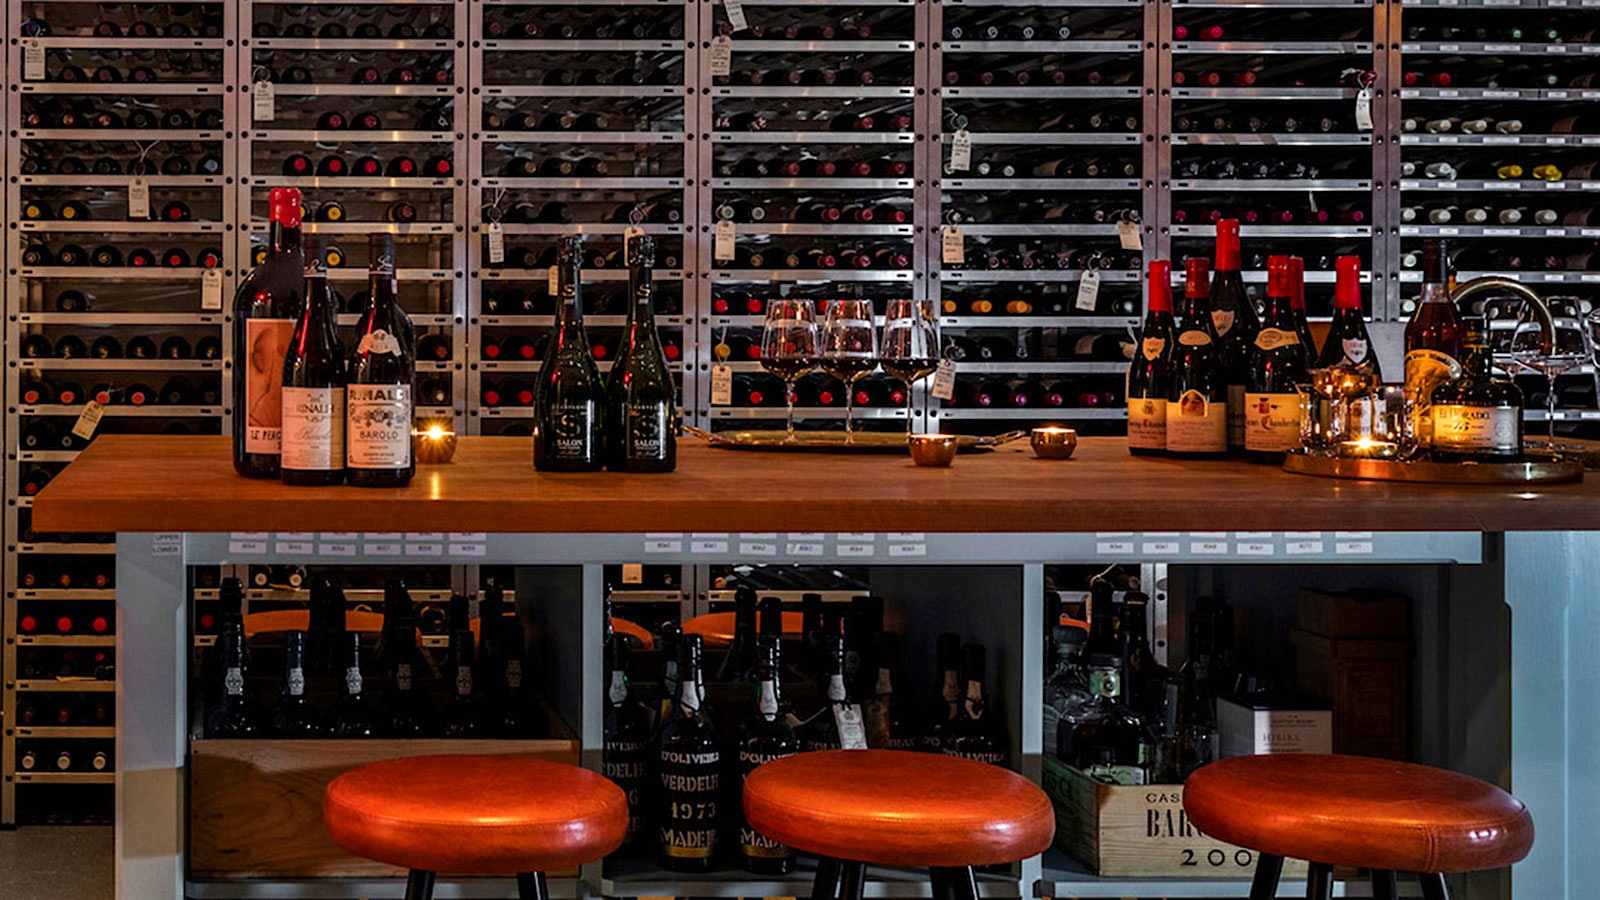  The sleek, modern-design cellar at March, with metal bottle shelves, a table lined with wine bottles and wineglasses and three red, leather stools